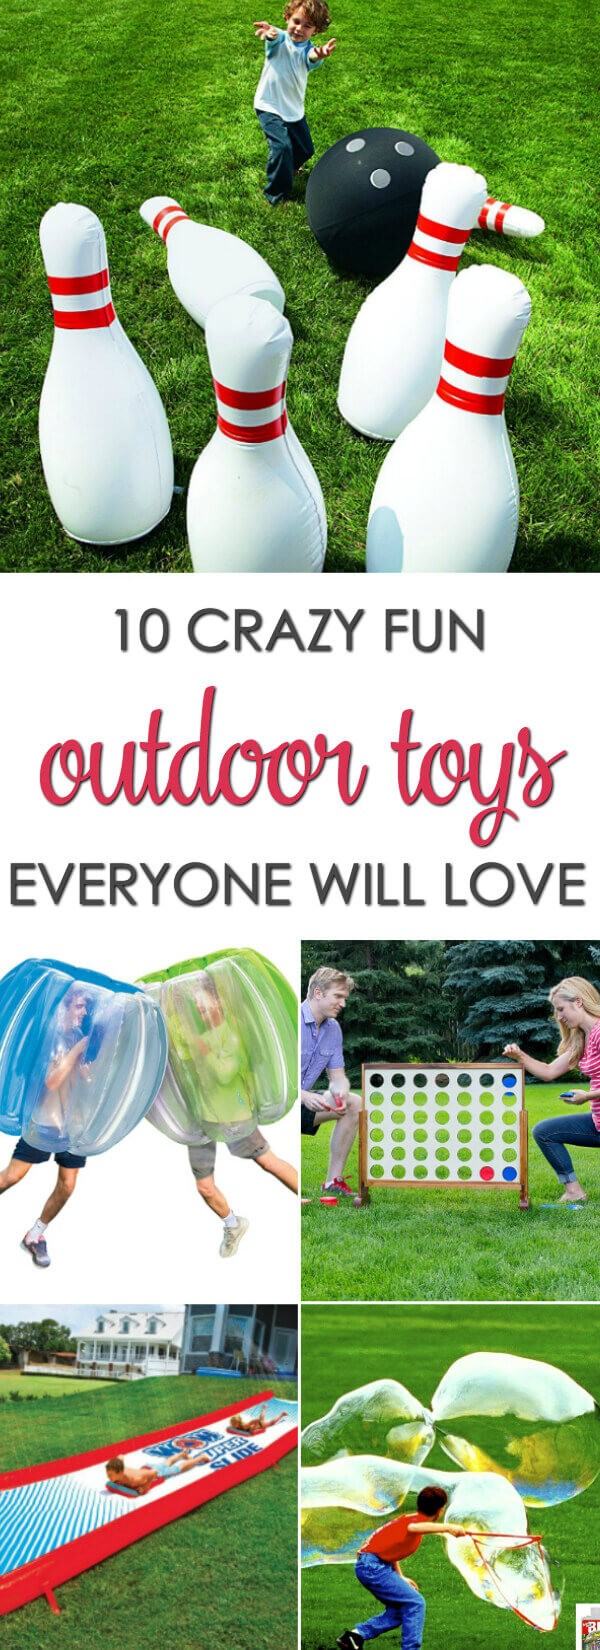 10 crazy fun outdoor toys for kids of all ages